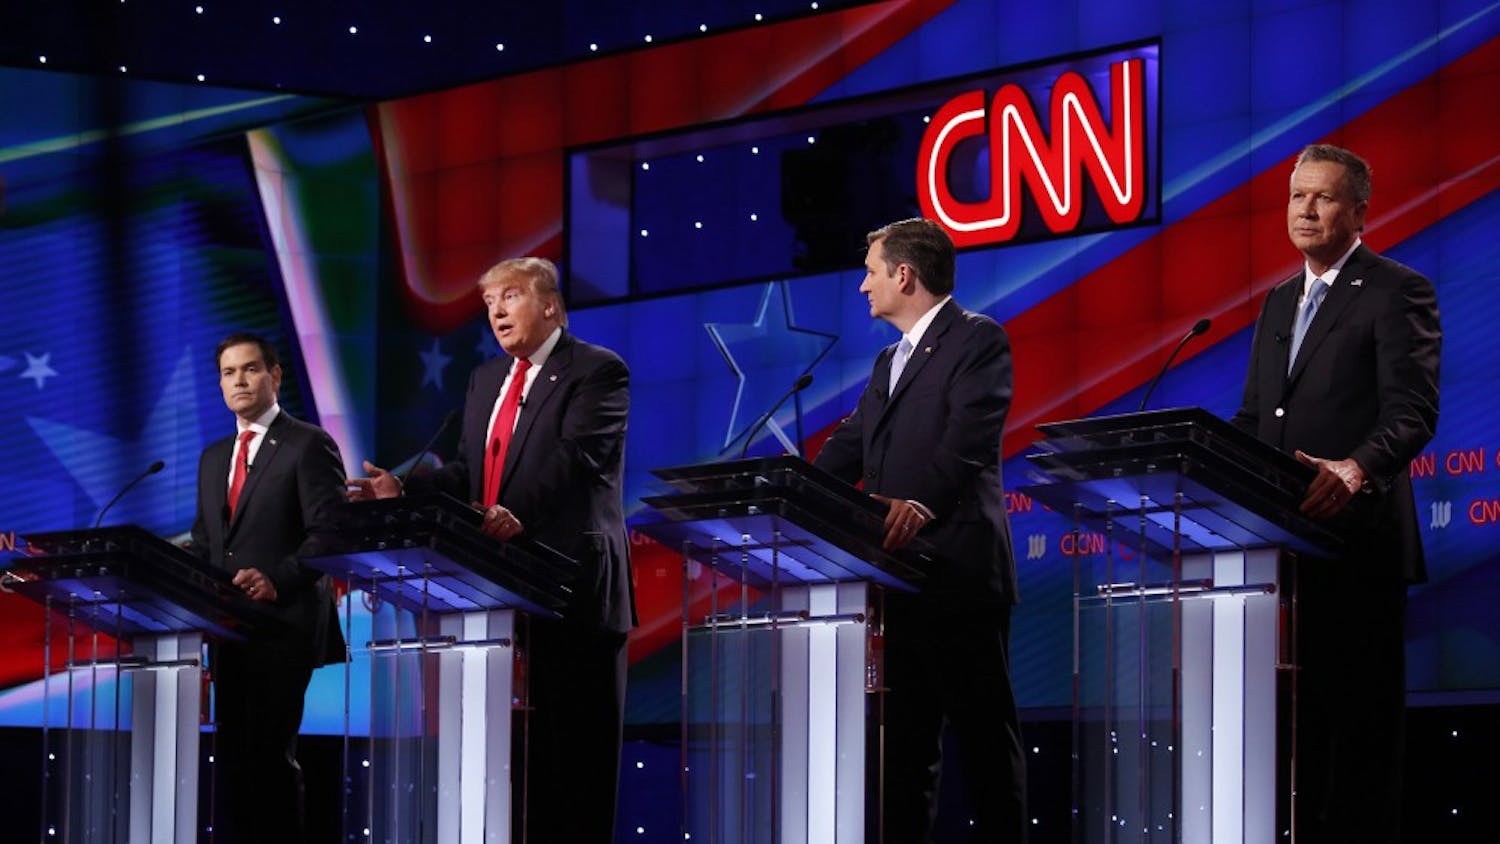 From left, Republican primary candidates Sen. Marco Rubio, Donald Trump, Ted Cruz, and John Kasich, during the GOP presidential primary debate at the University of Miami's Bank United Center in Coral Gables, Fla., on Thursday, March 10, 2016. (Carolyn Cole/Los Angeles Times/TNS)